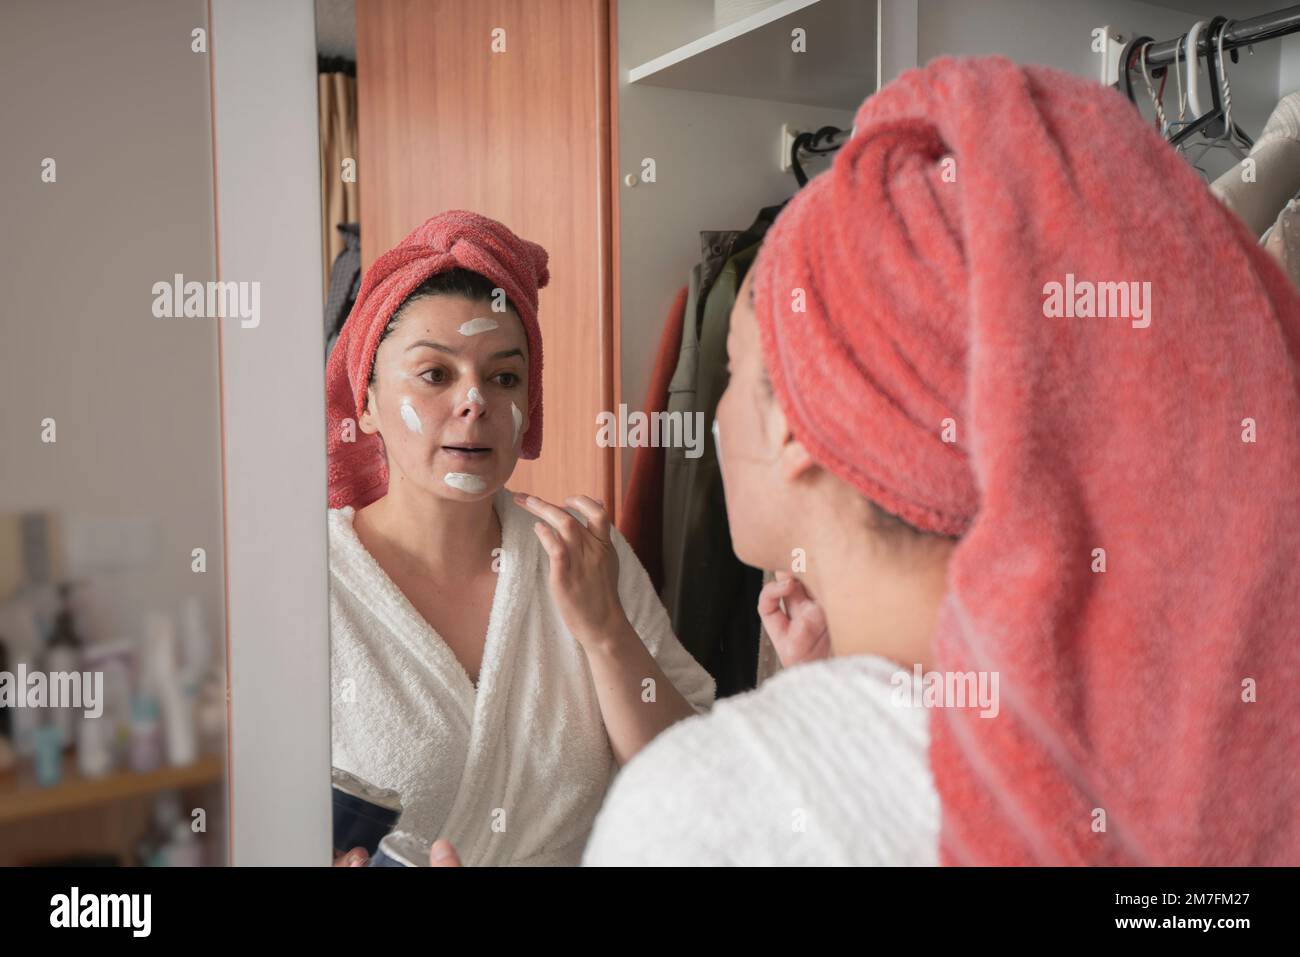 Beautiful Hispanic woman in a white bathrobe and red towel in her hair applying makeup with her hand on her face in front of the mirror on the closet Stock Photo